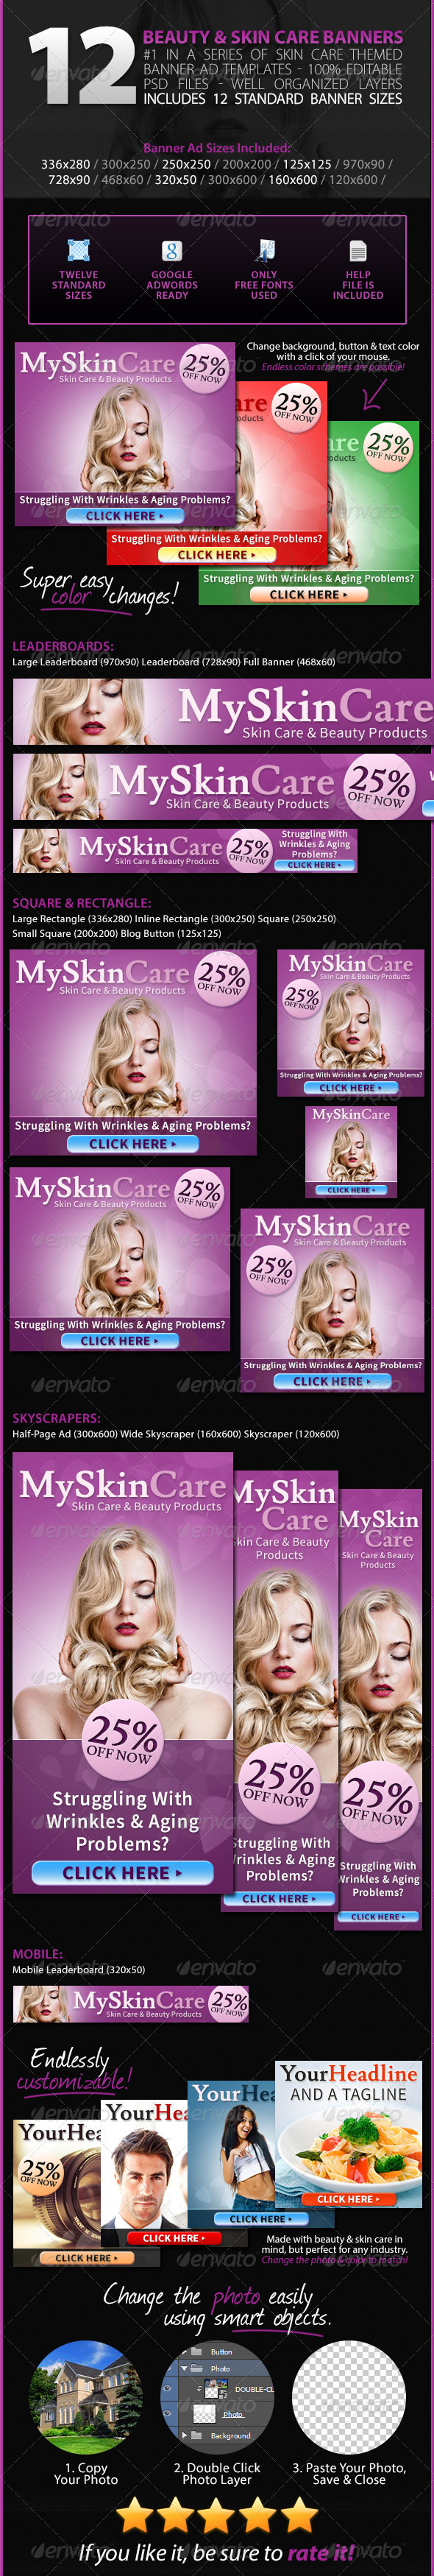 Beauty & Skin Care Banner Ads - Set 1 - Banners & Ads Web Elements